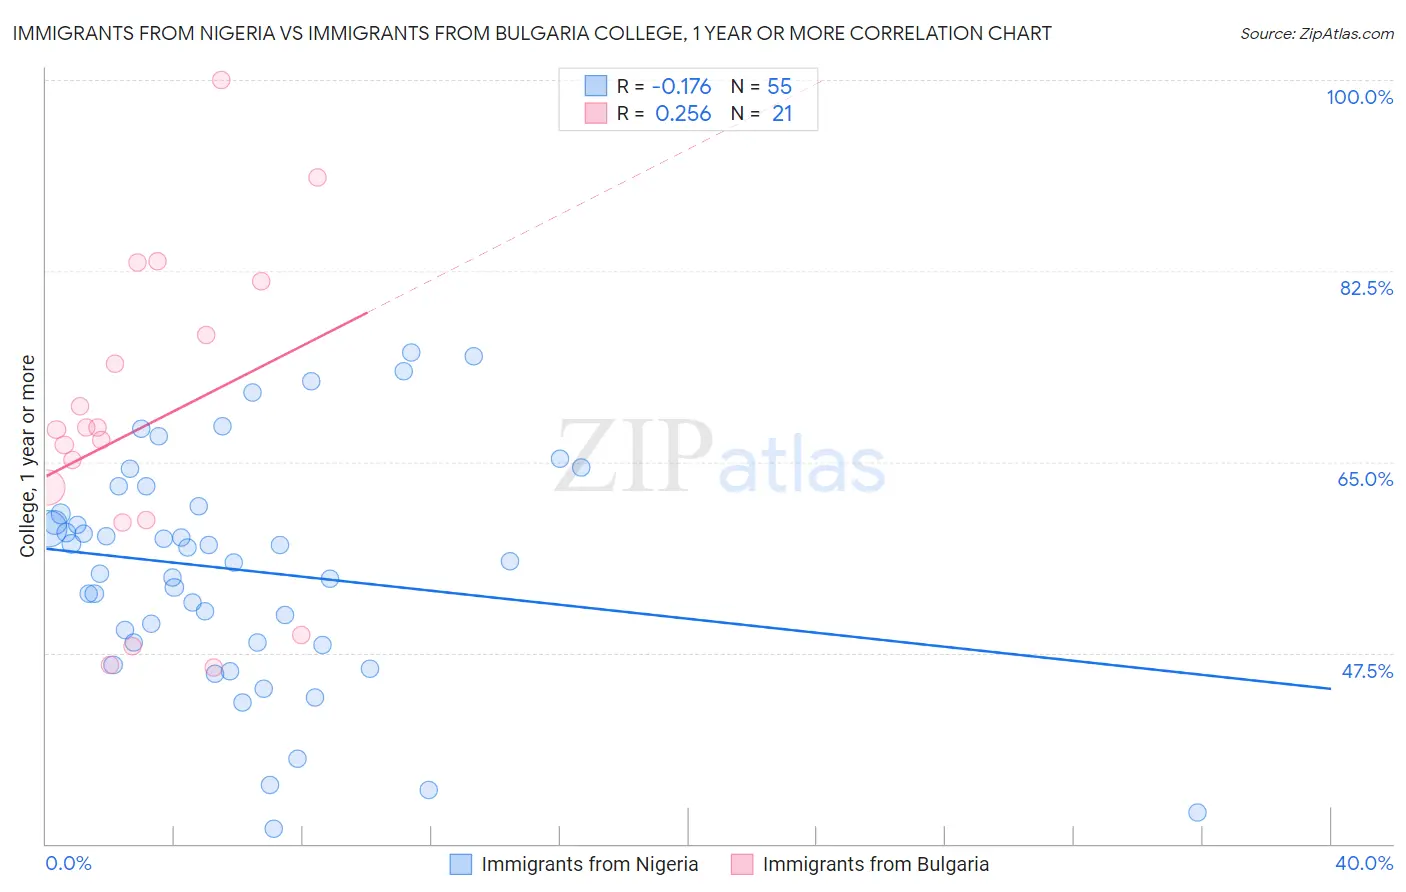 Immigrants from Nigeria vs Immigrants from Bulgaria College, 1 year or more